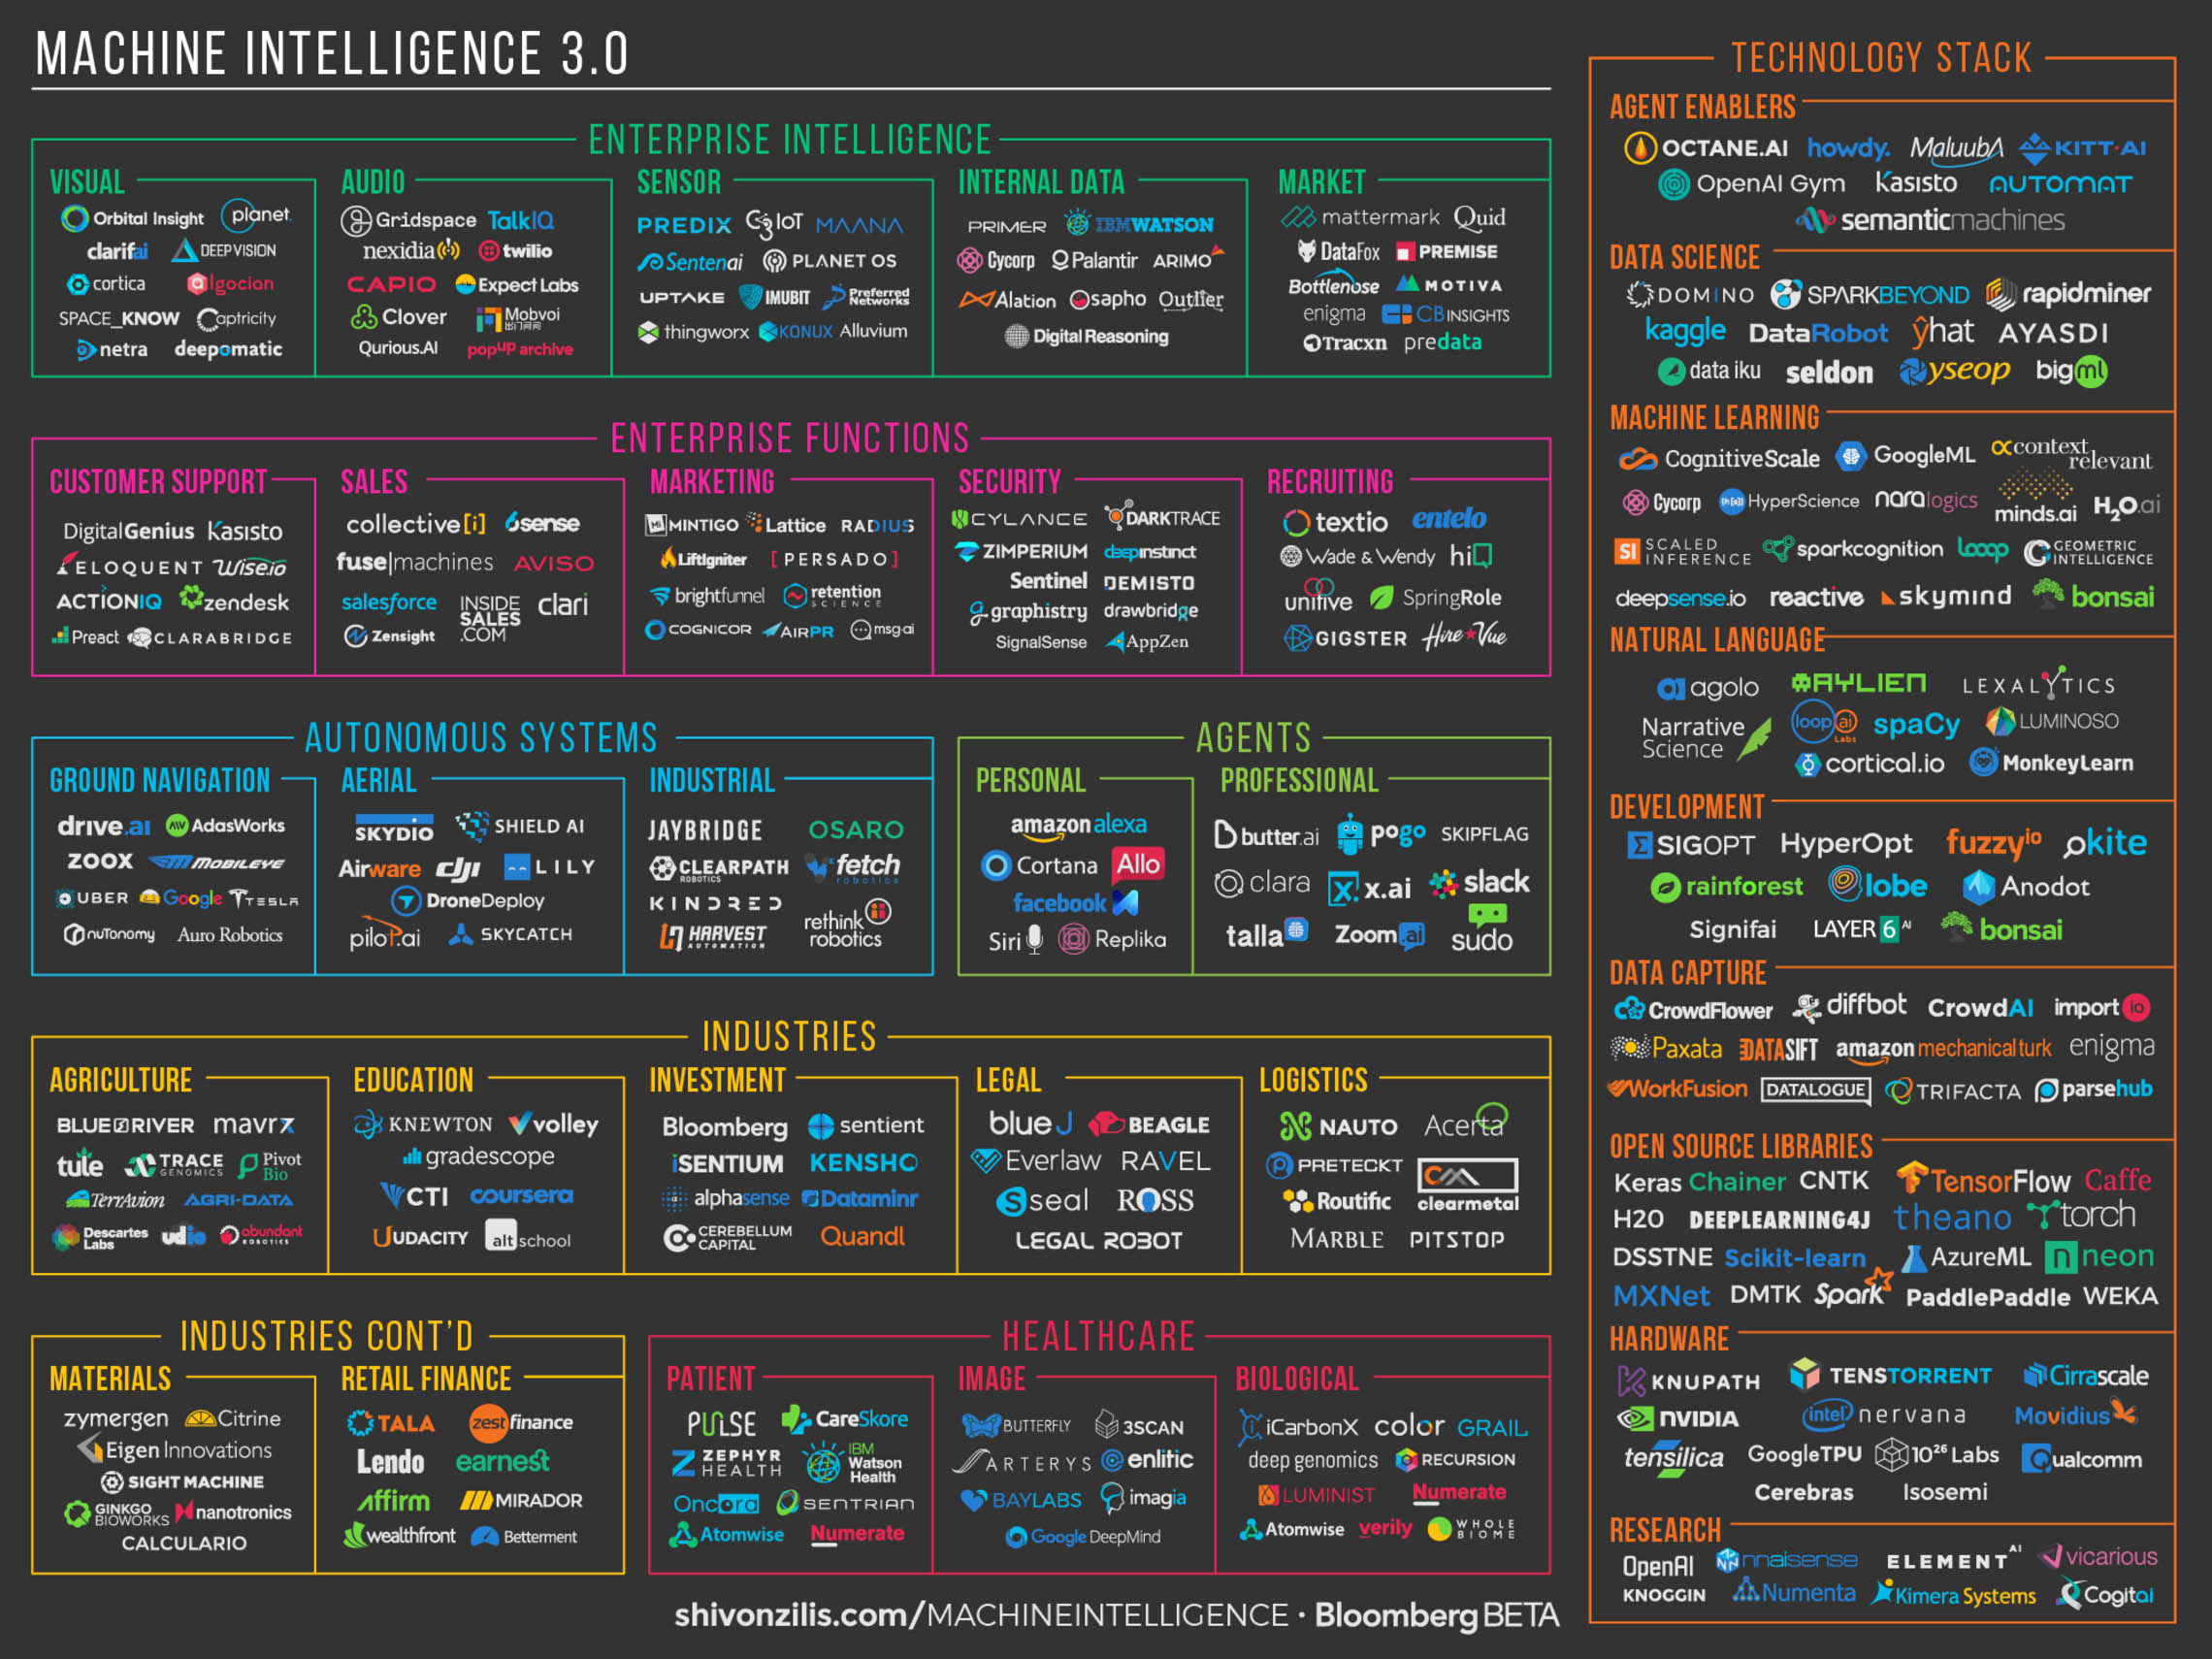 The Current State of Machine Intelligence 3.0 (Source)